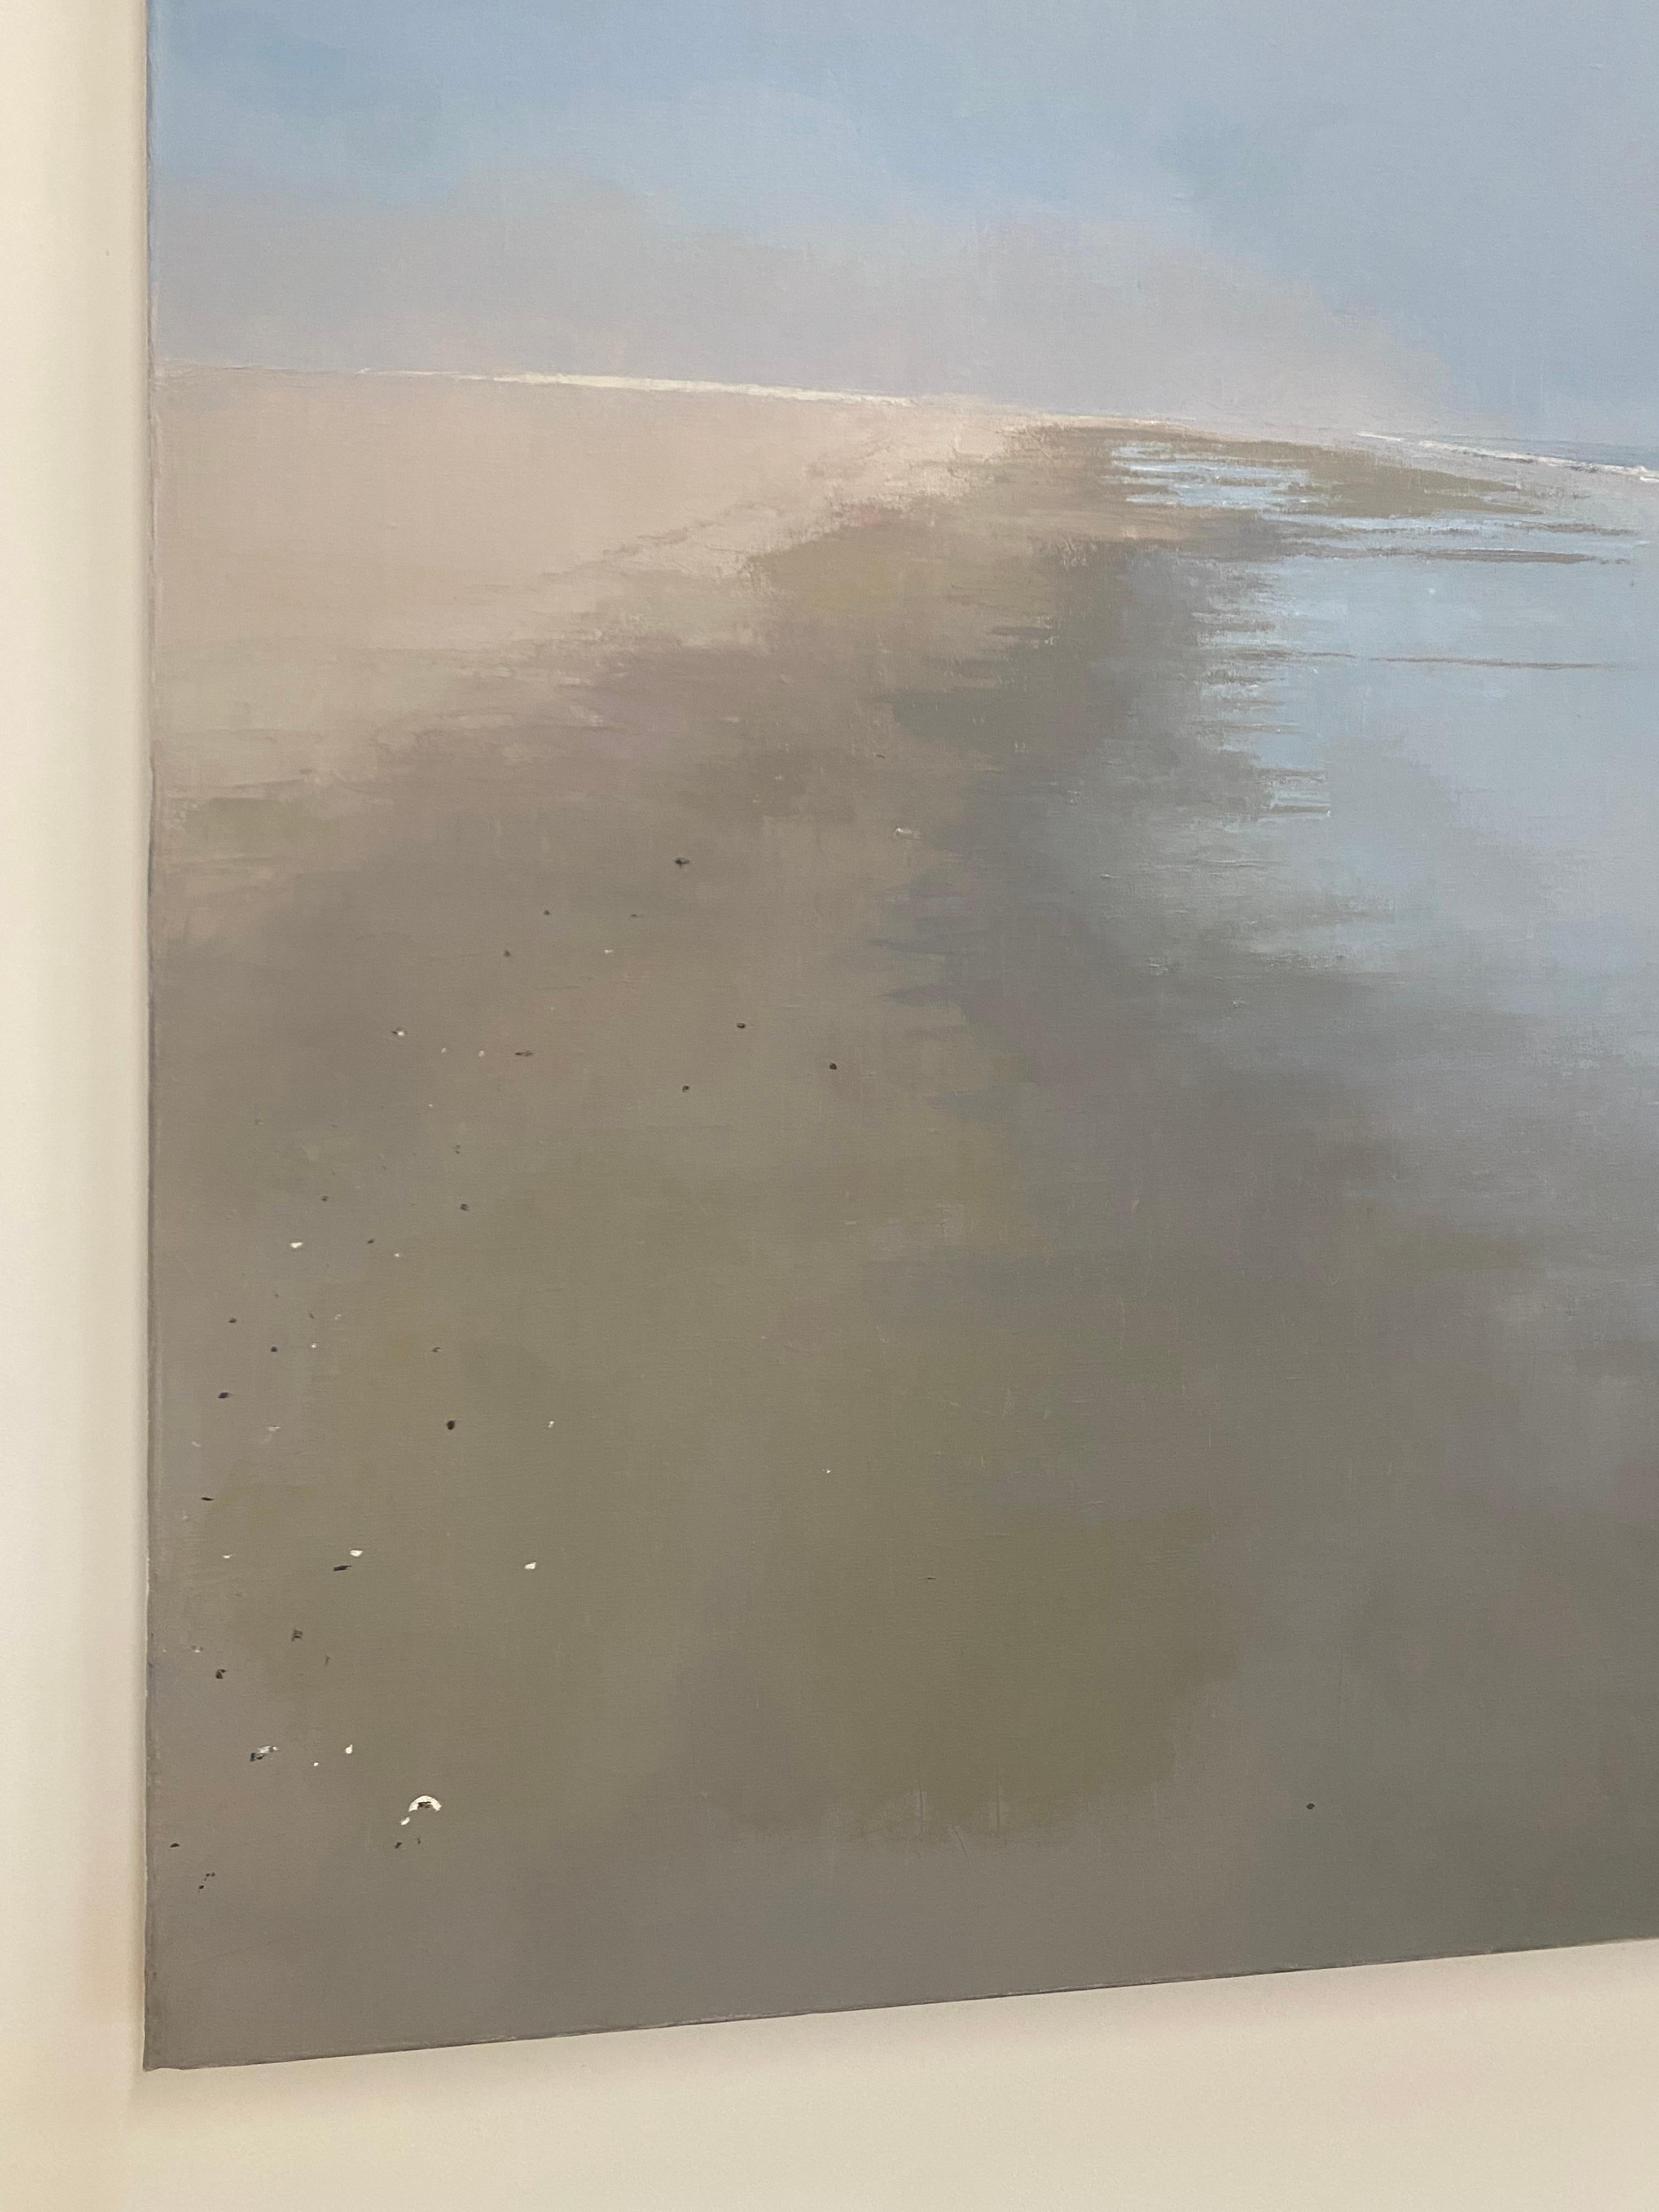 A peaceful outdoor beach scene of the sandy shoreline along the ocean, shrouded in fog beneath a calm, pale blue sky. Signed, titled, and dated on verso.

The paintings of Thomas Sarrantonio seek to mediate between realms of external perception and